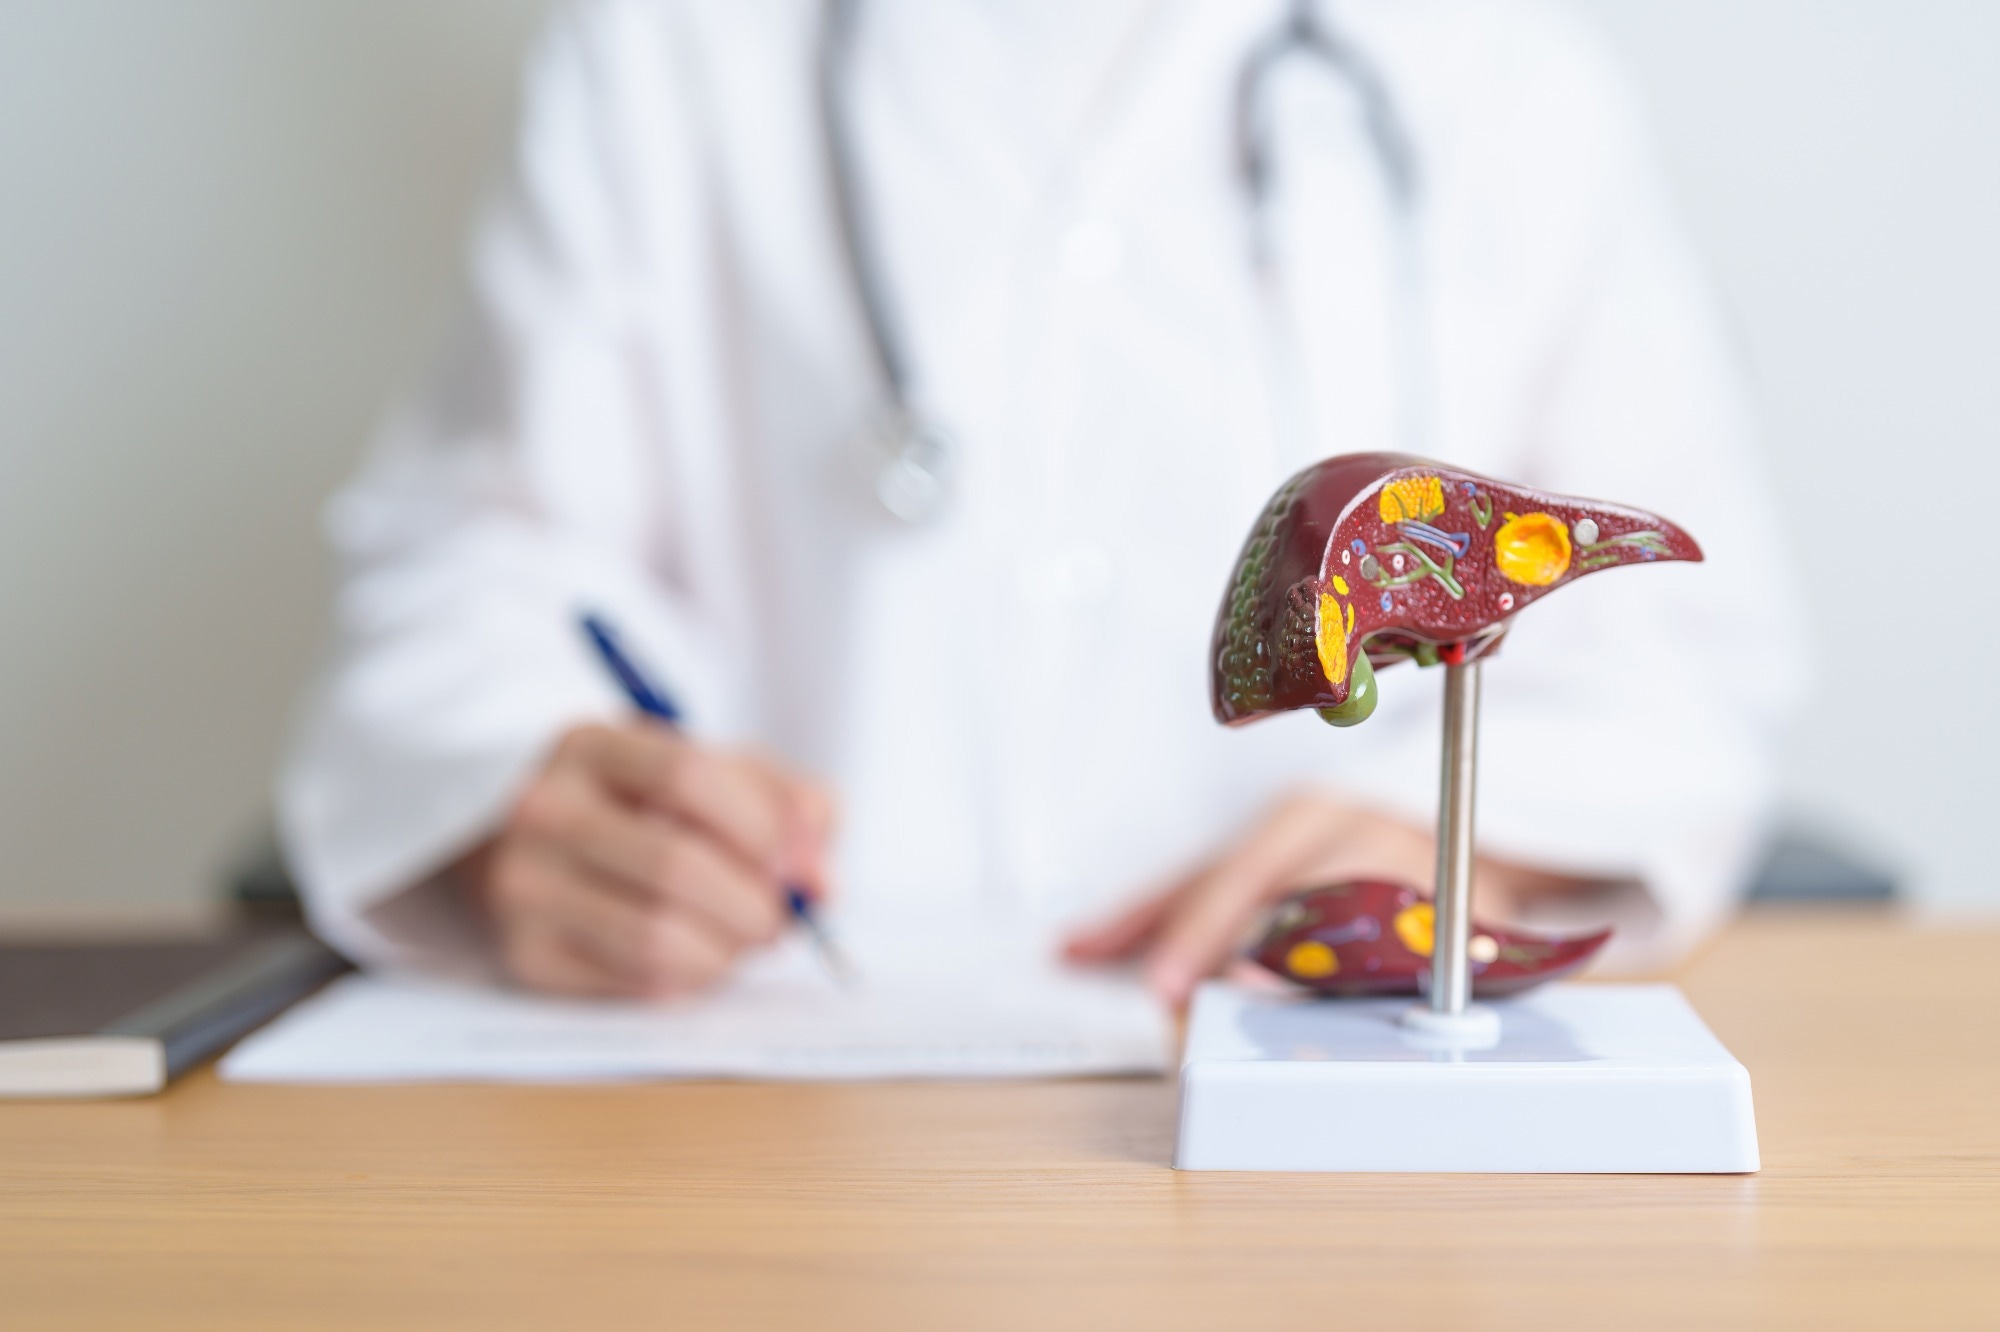 Study: Markers of insulin resistance associated with non-alcoholic fatty liver disease in non-diabetic population. Image Credit: Jo Panuwat D / Shutterstock.com